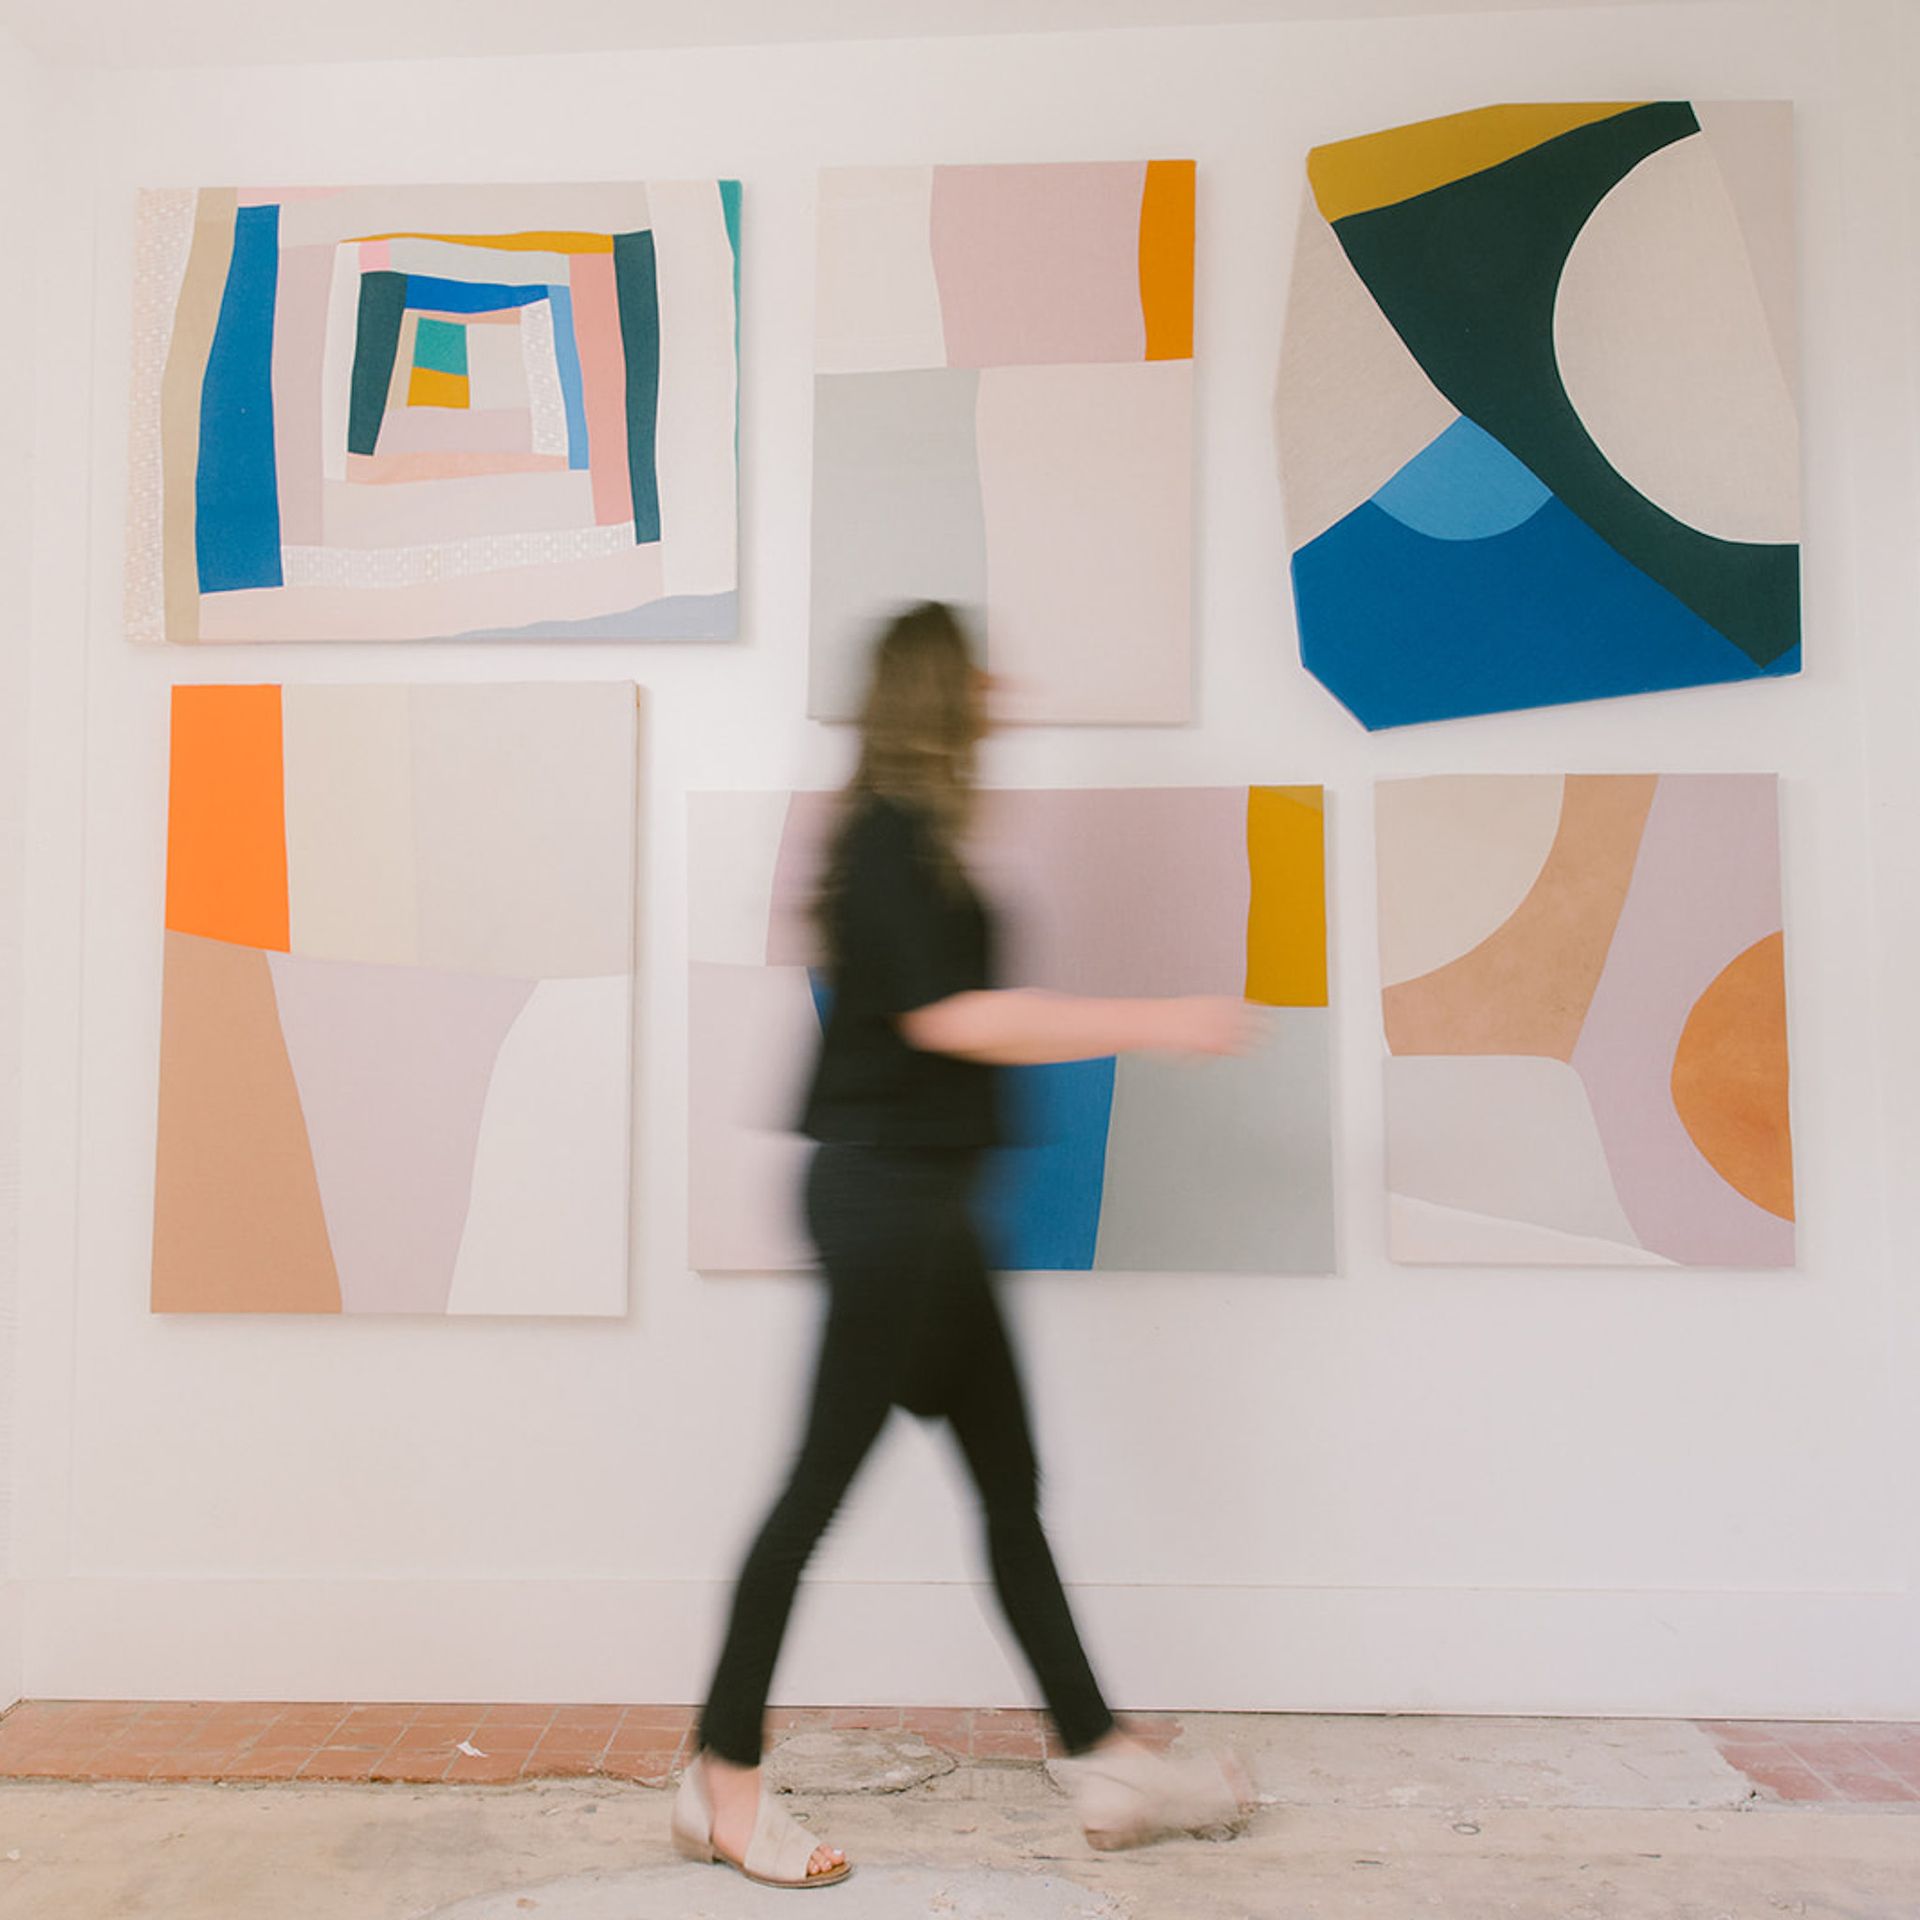 Sydney in her studio, walking past her hanging artwork. she is a blur 